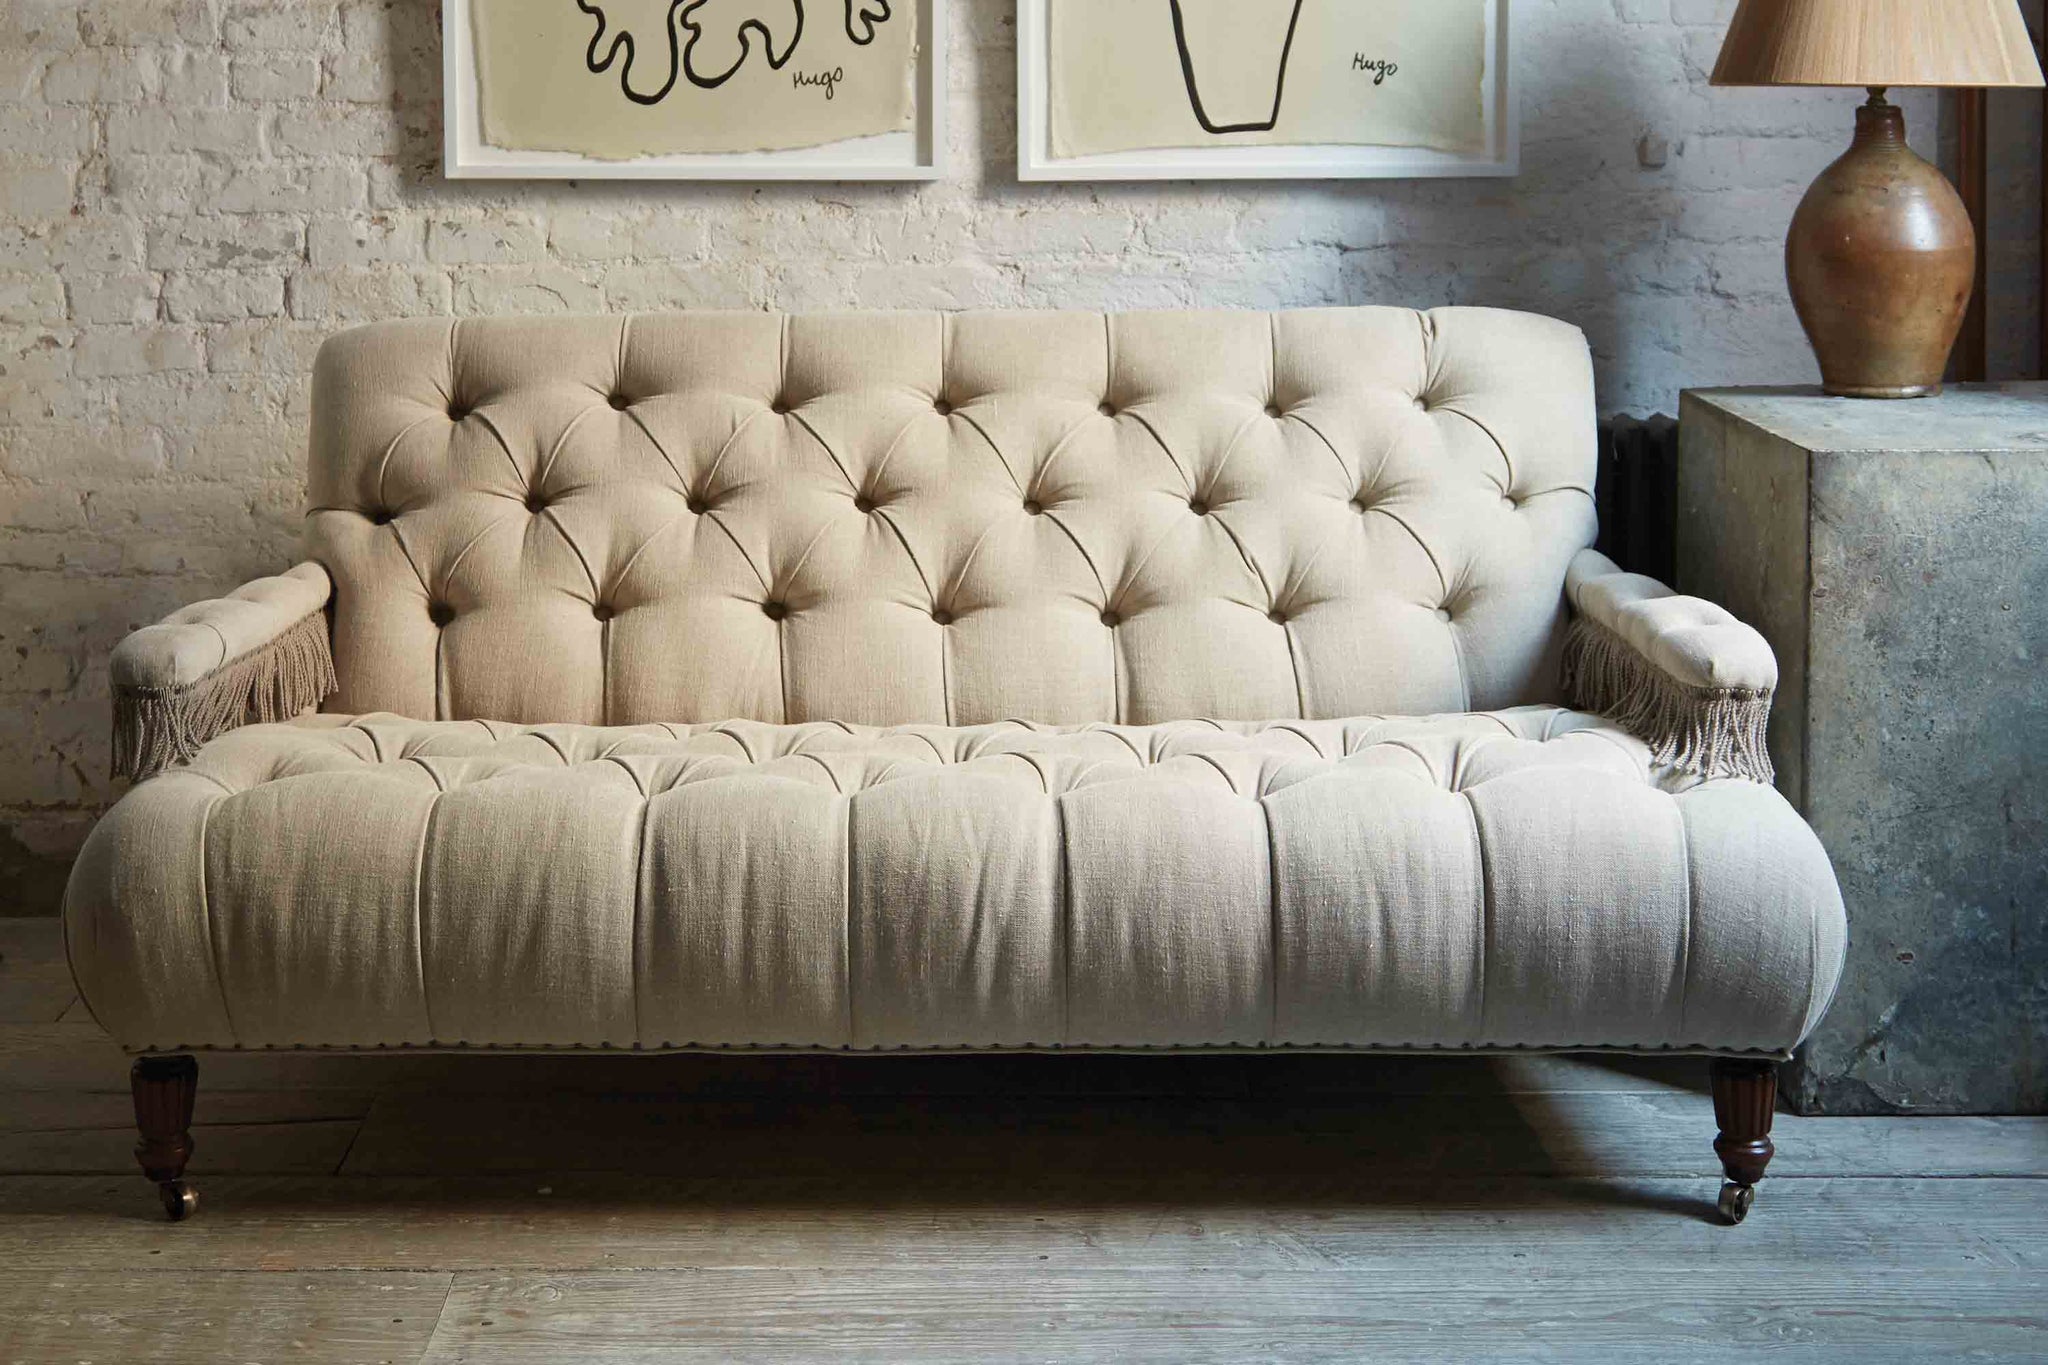  Tufted small scale sofa in a natural Vintage Flax linen with fringes on the arm rests. It is in a room wit daylight and a white brick wall and a wood floor. 